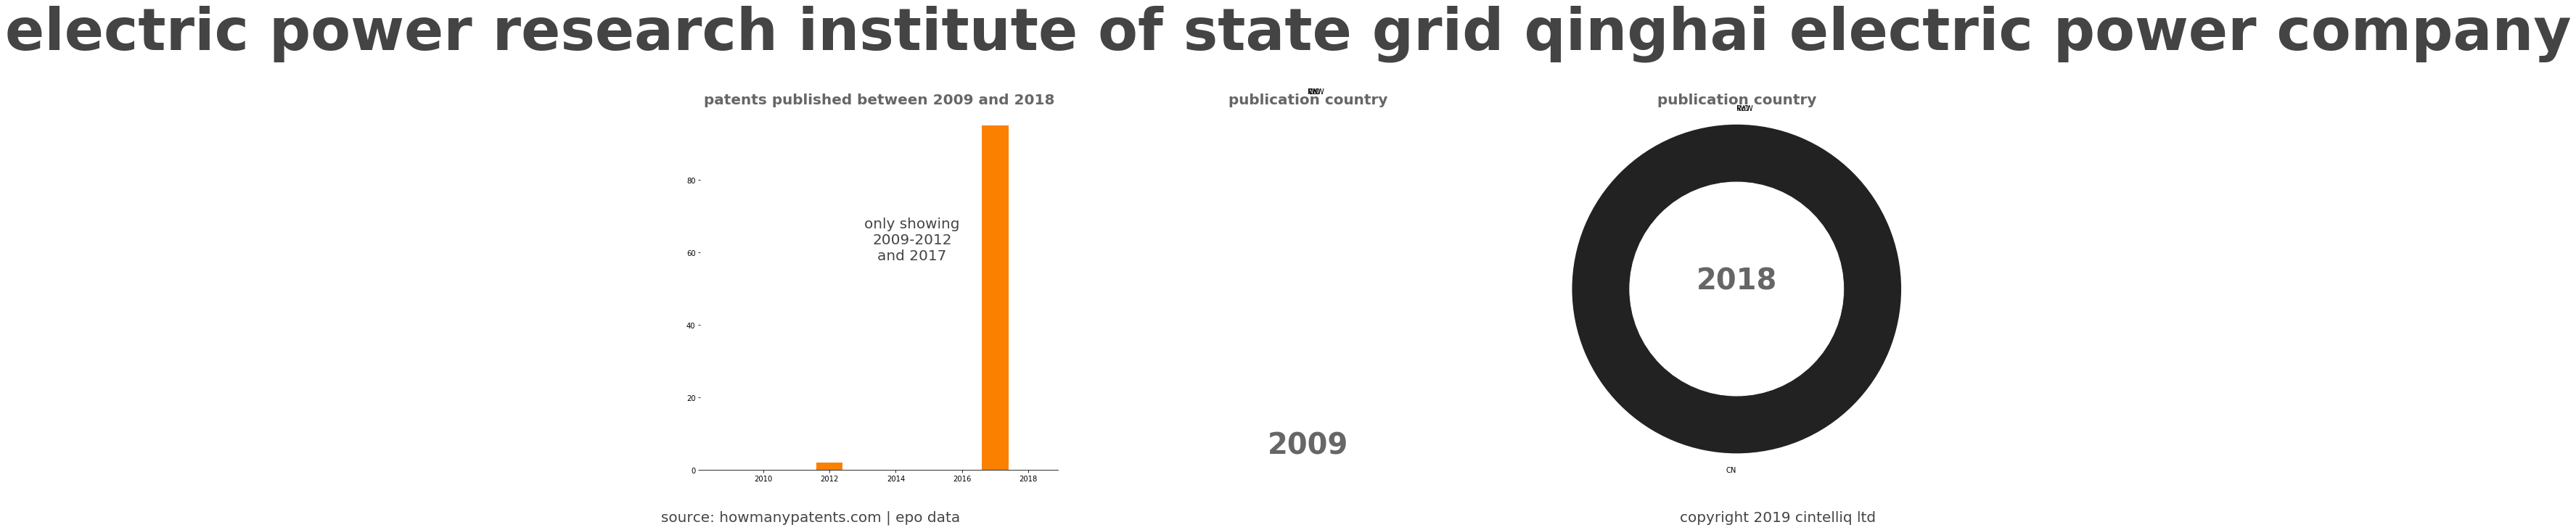 summary of patents for Electric Power Research Institute Of State Grid Qinghai Electric Power Company